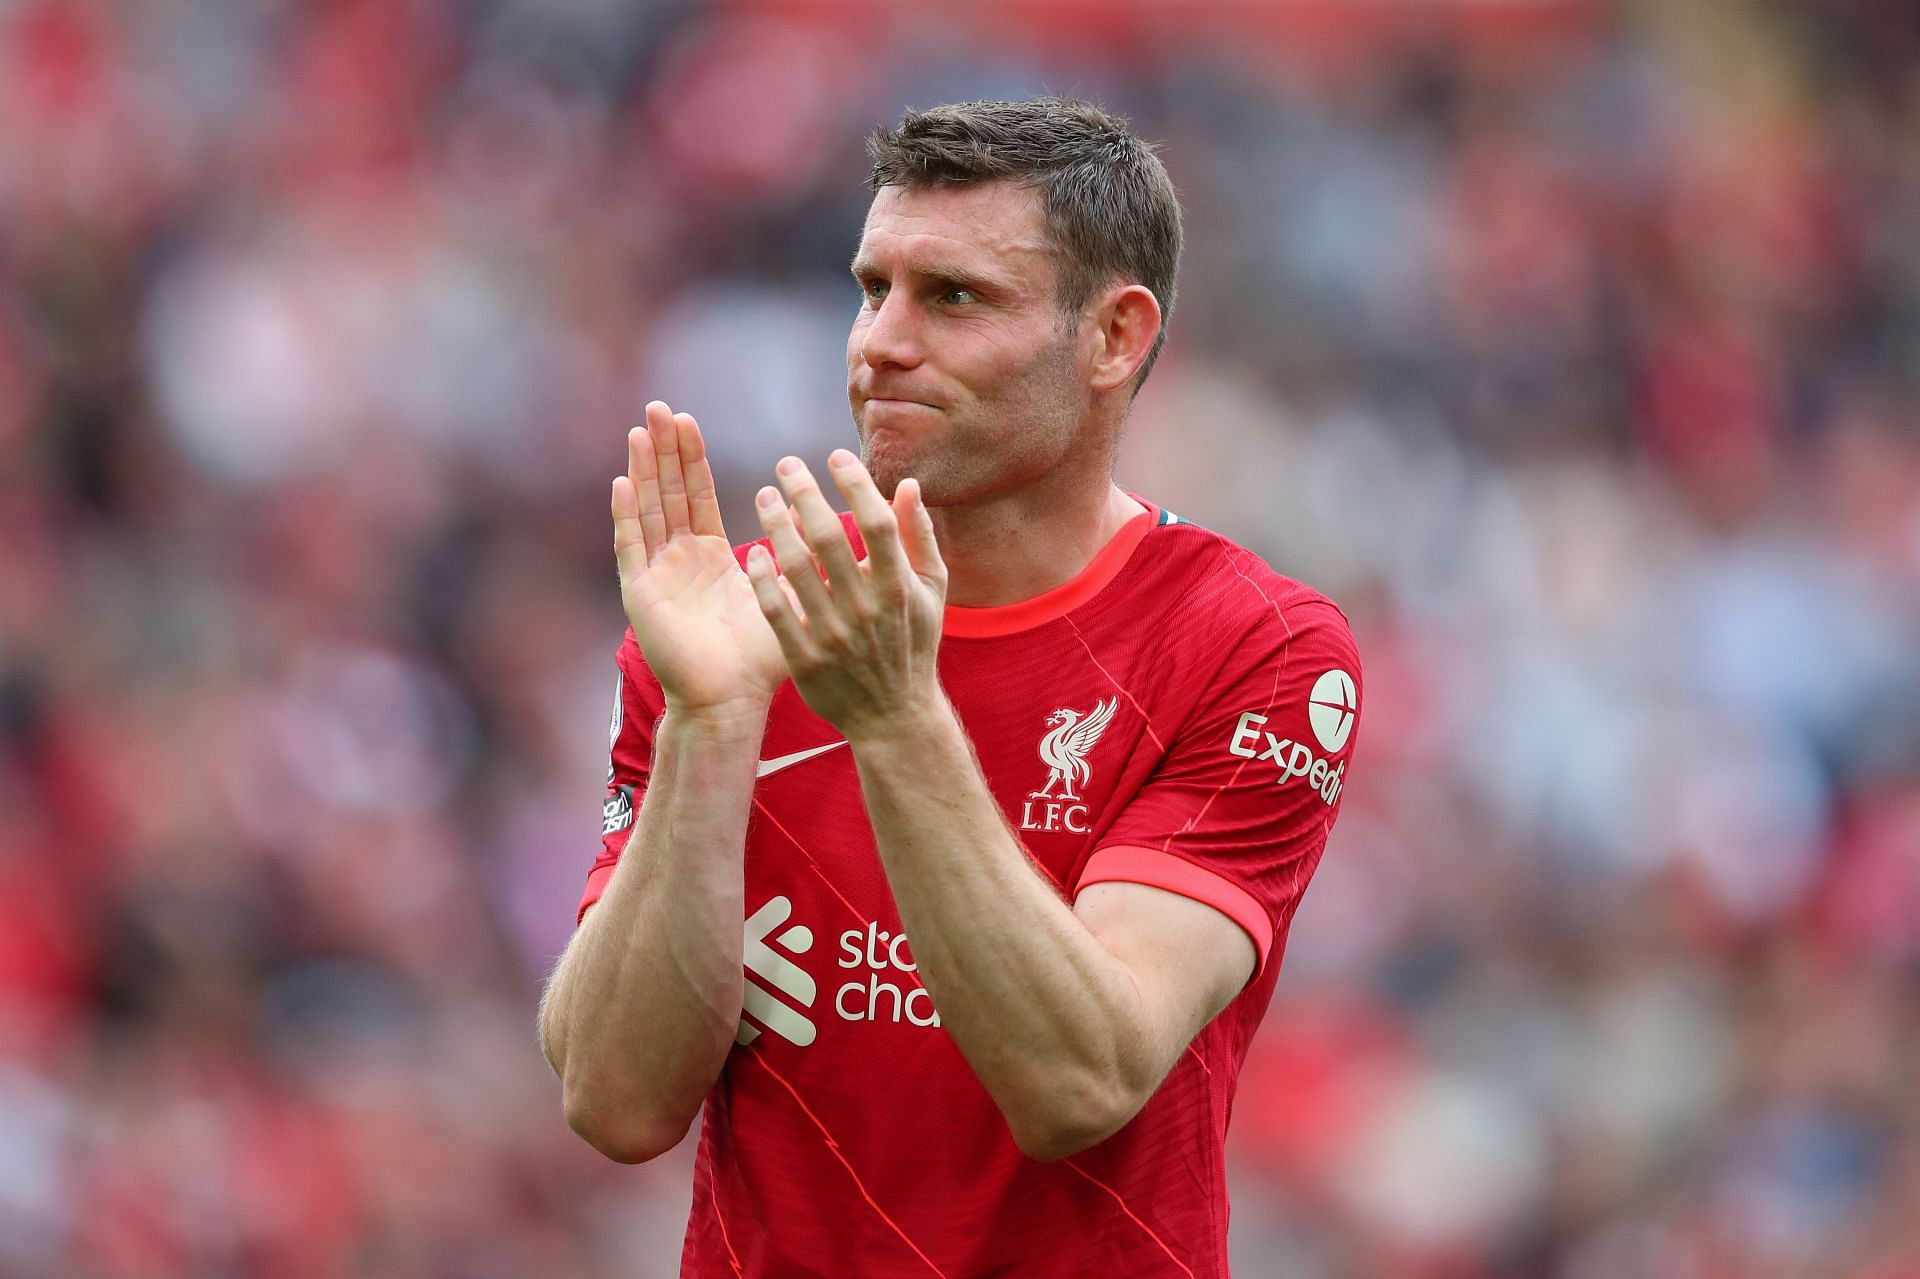 James Milner recently signed a new contract with Liverpool.